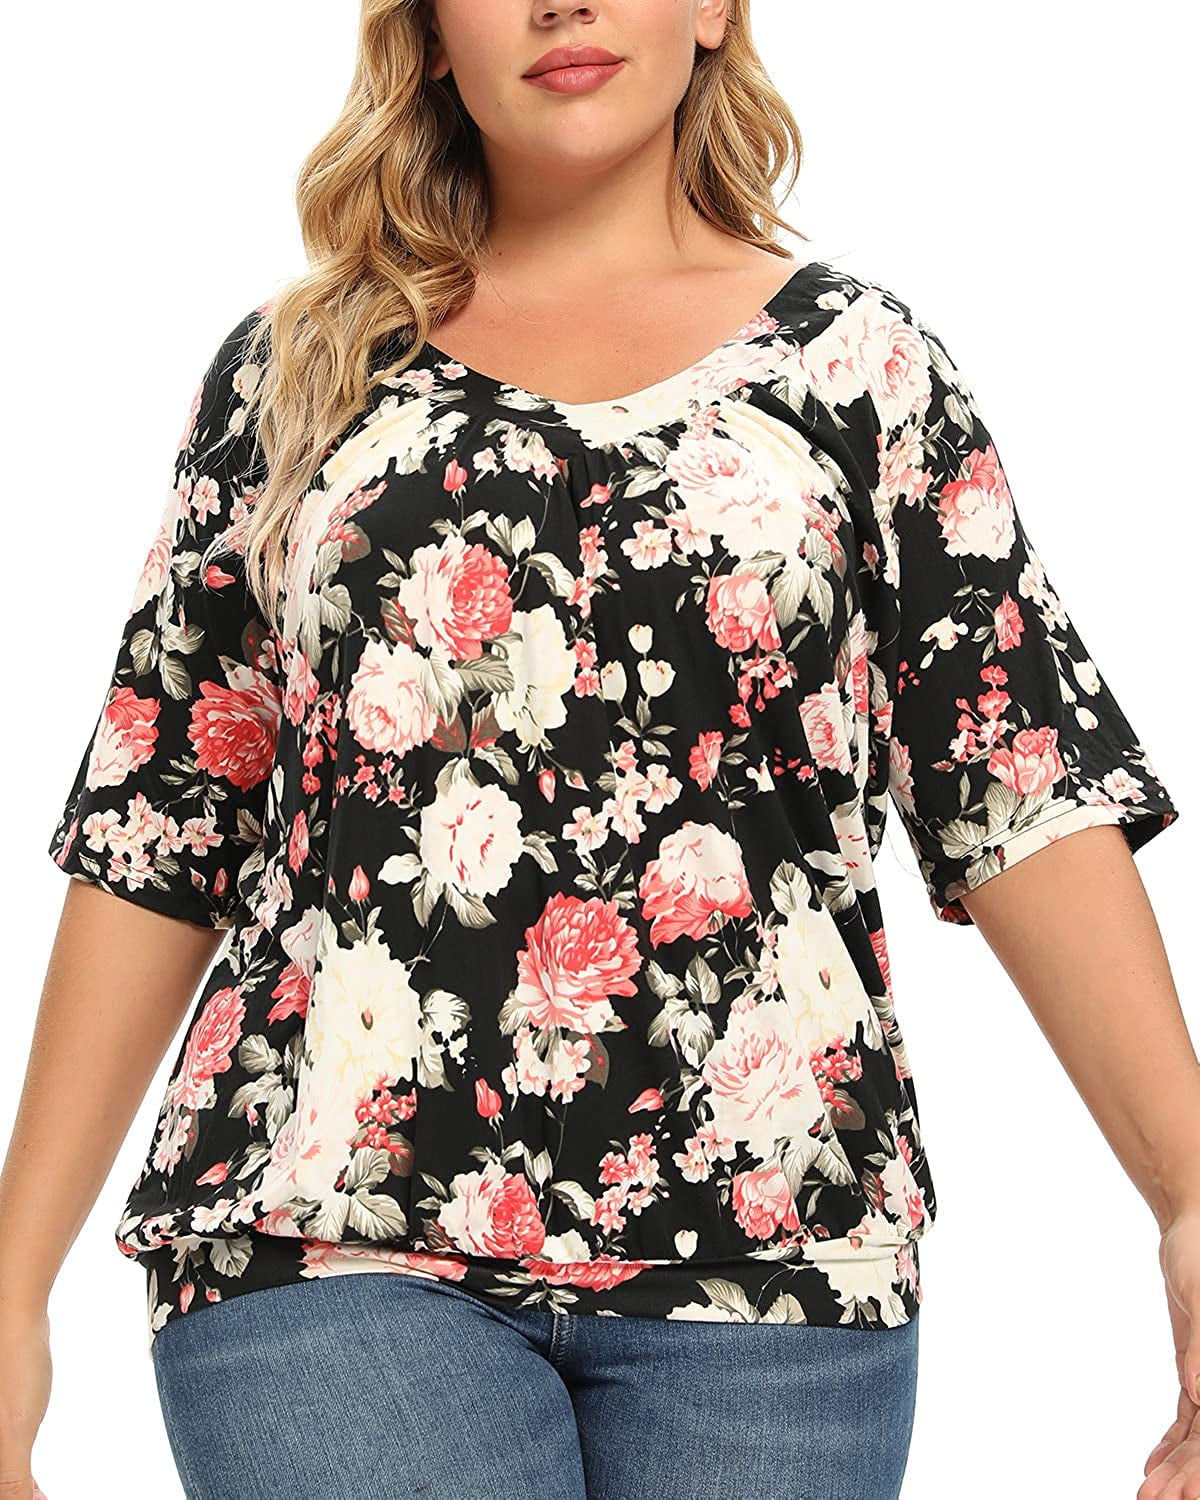 andy & natalie - andy & natalie Women's Plus Size Tops Pleated V Neck ...